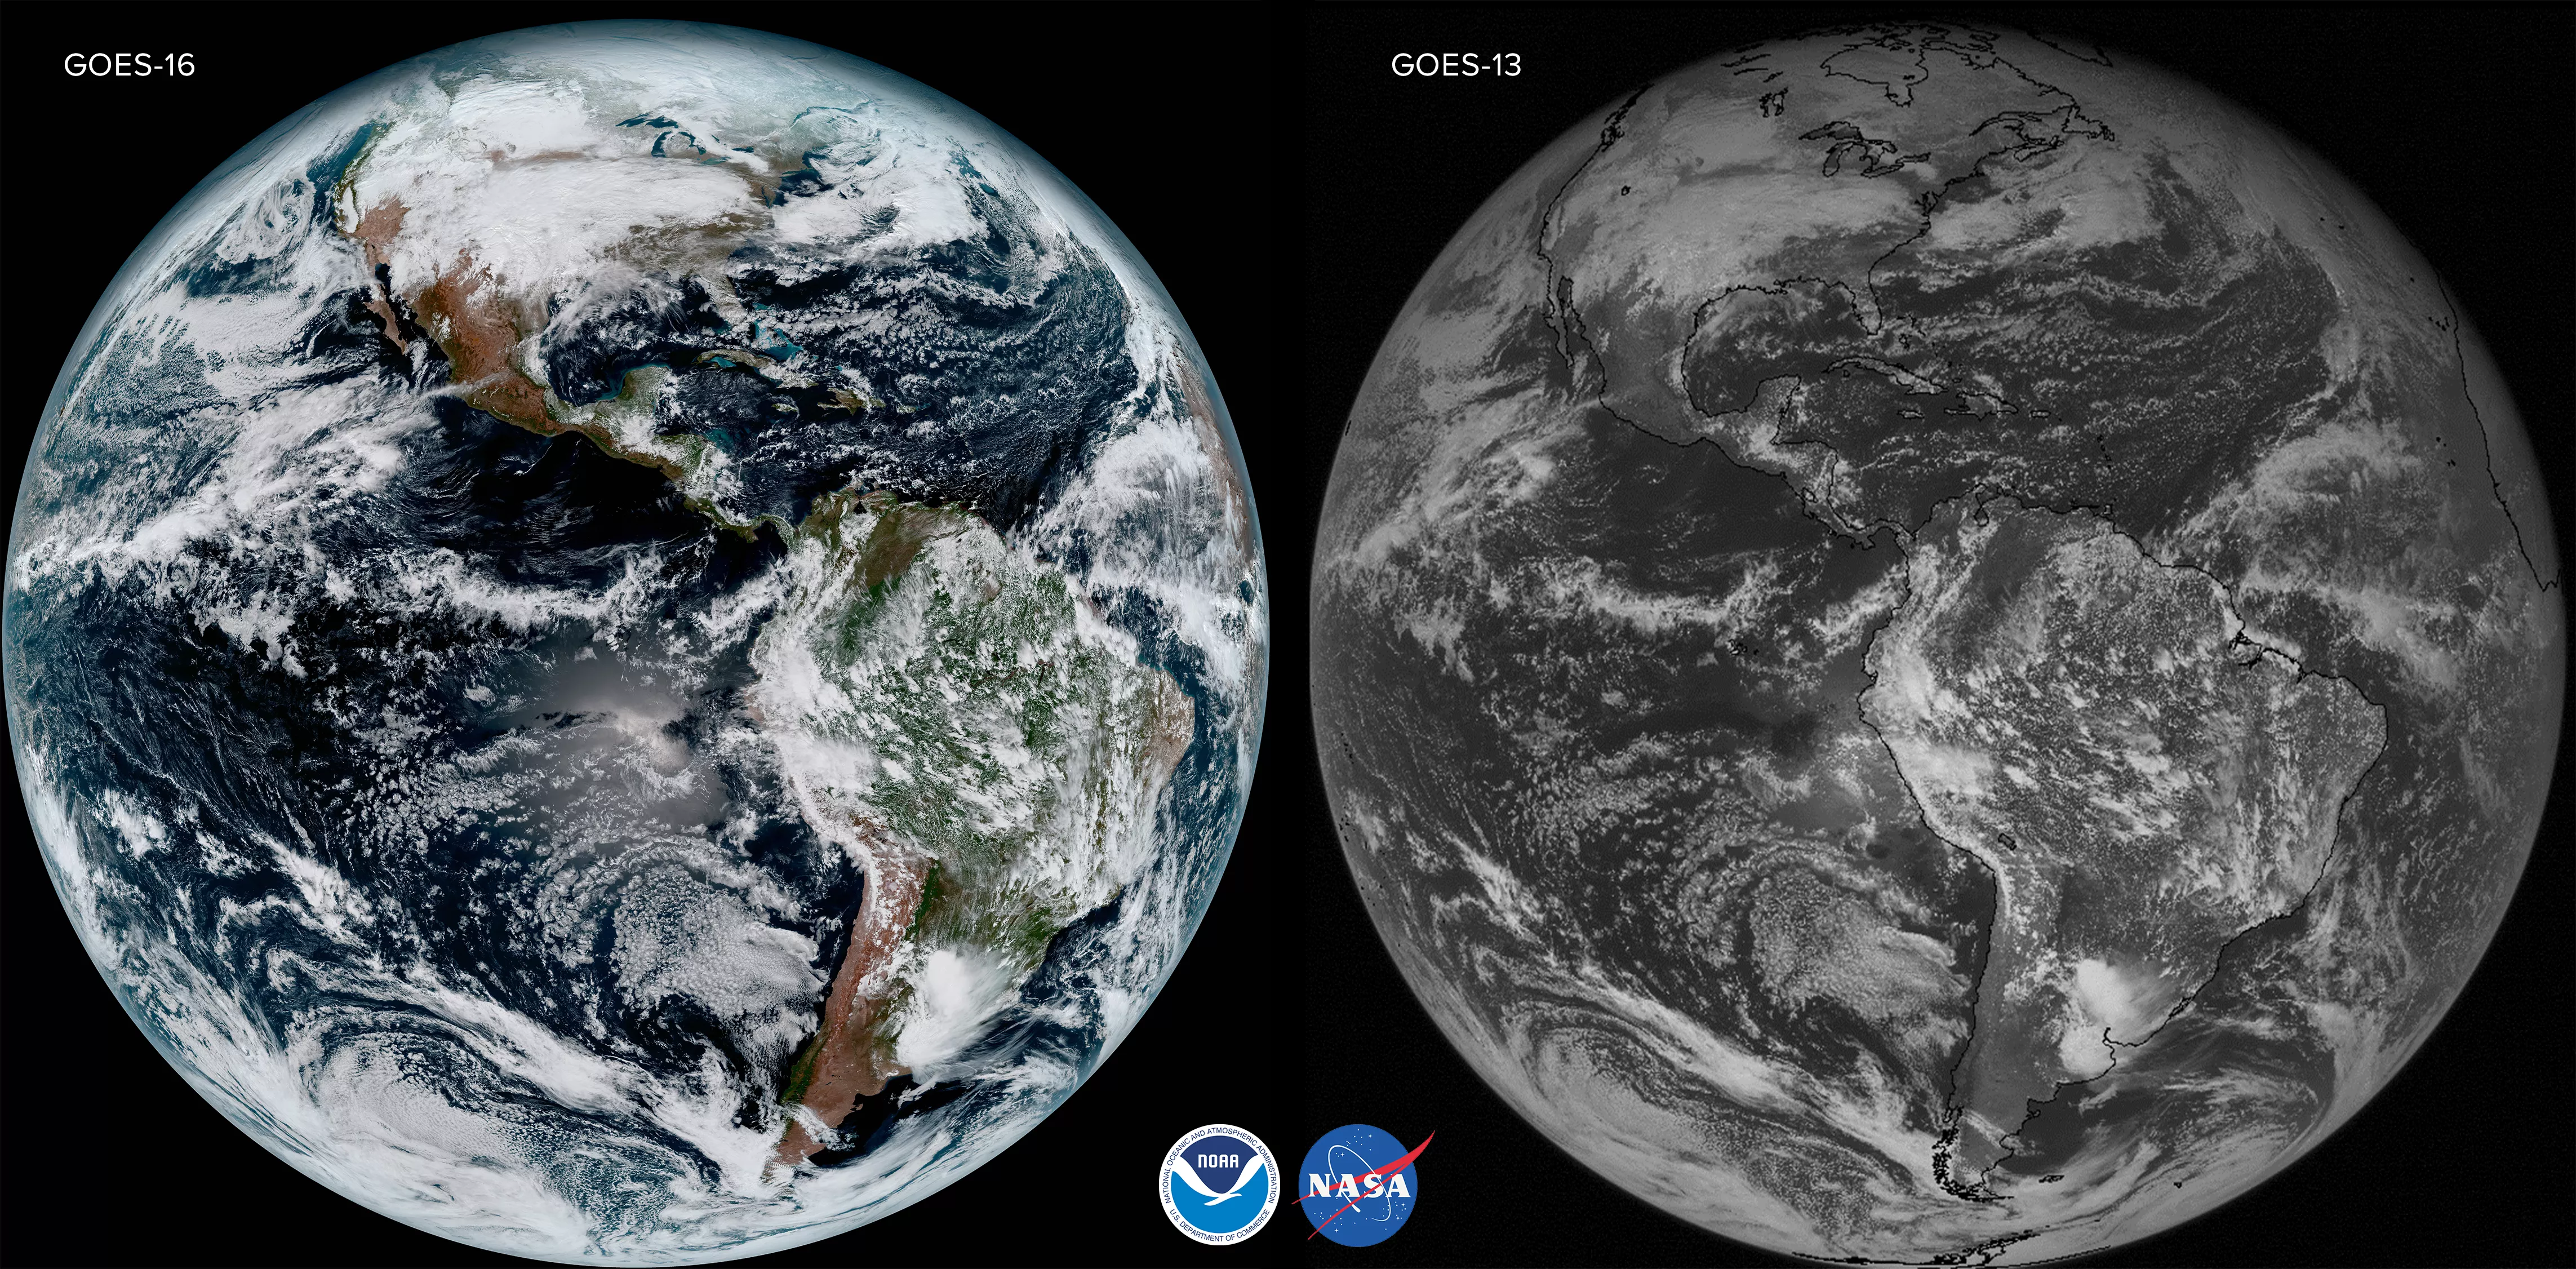 Images of the earth side by side